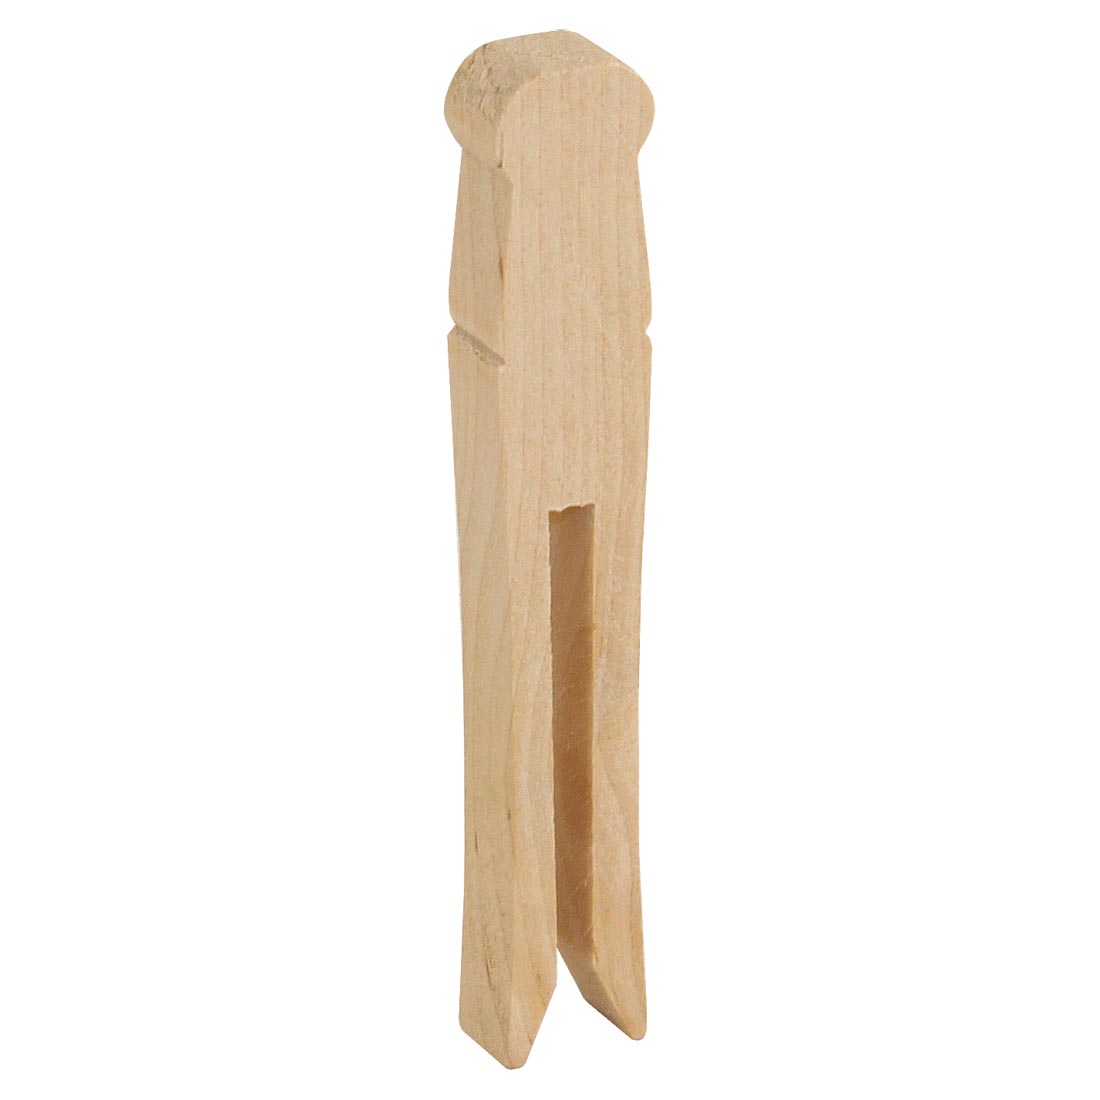 Creativity Street Flat Slotted wooden Clothes Pin